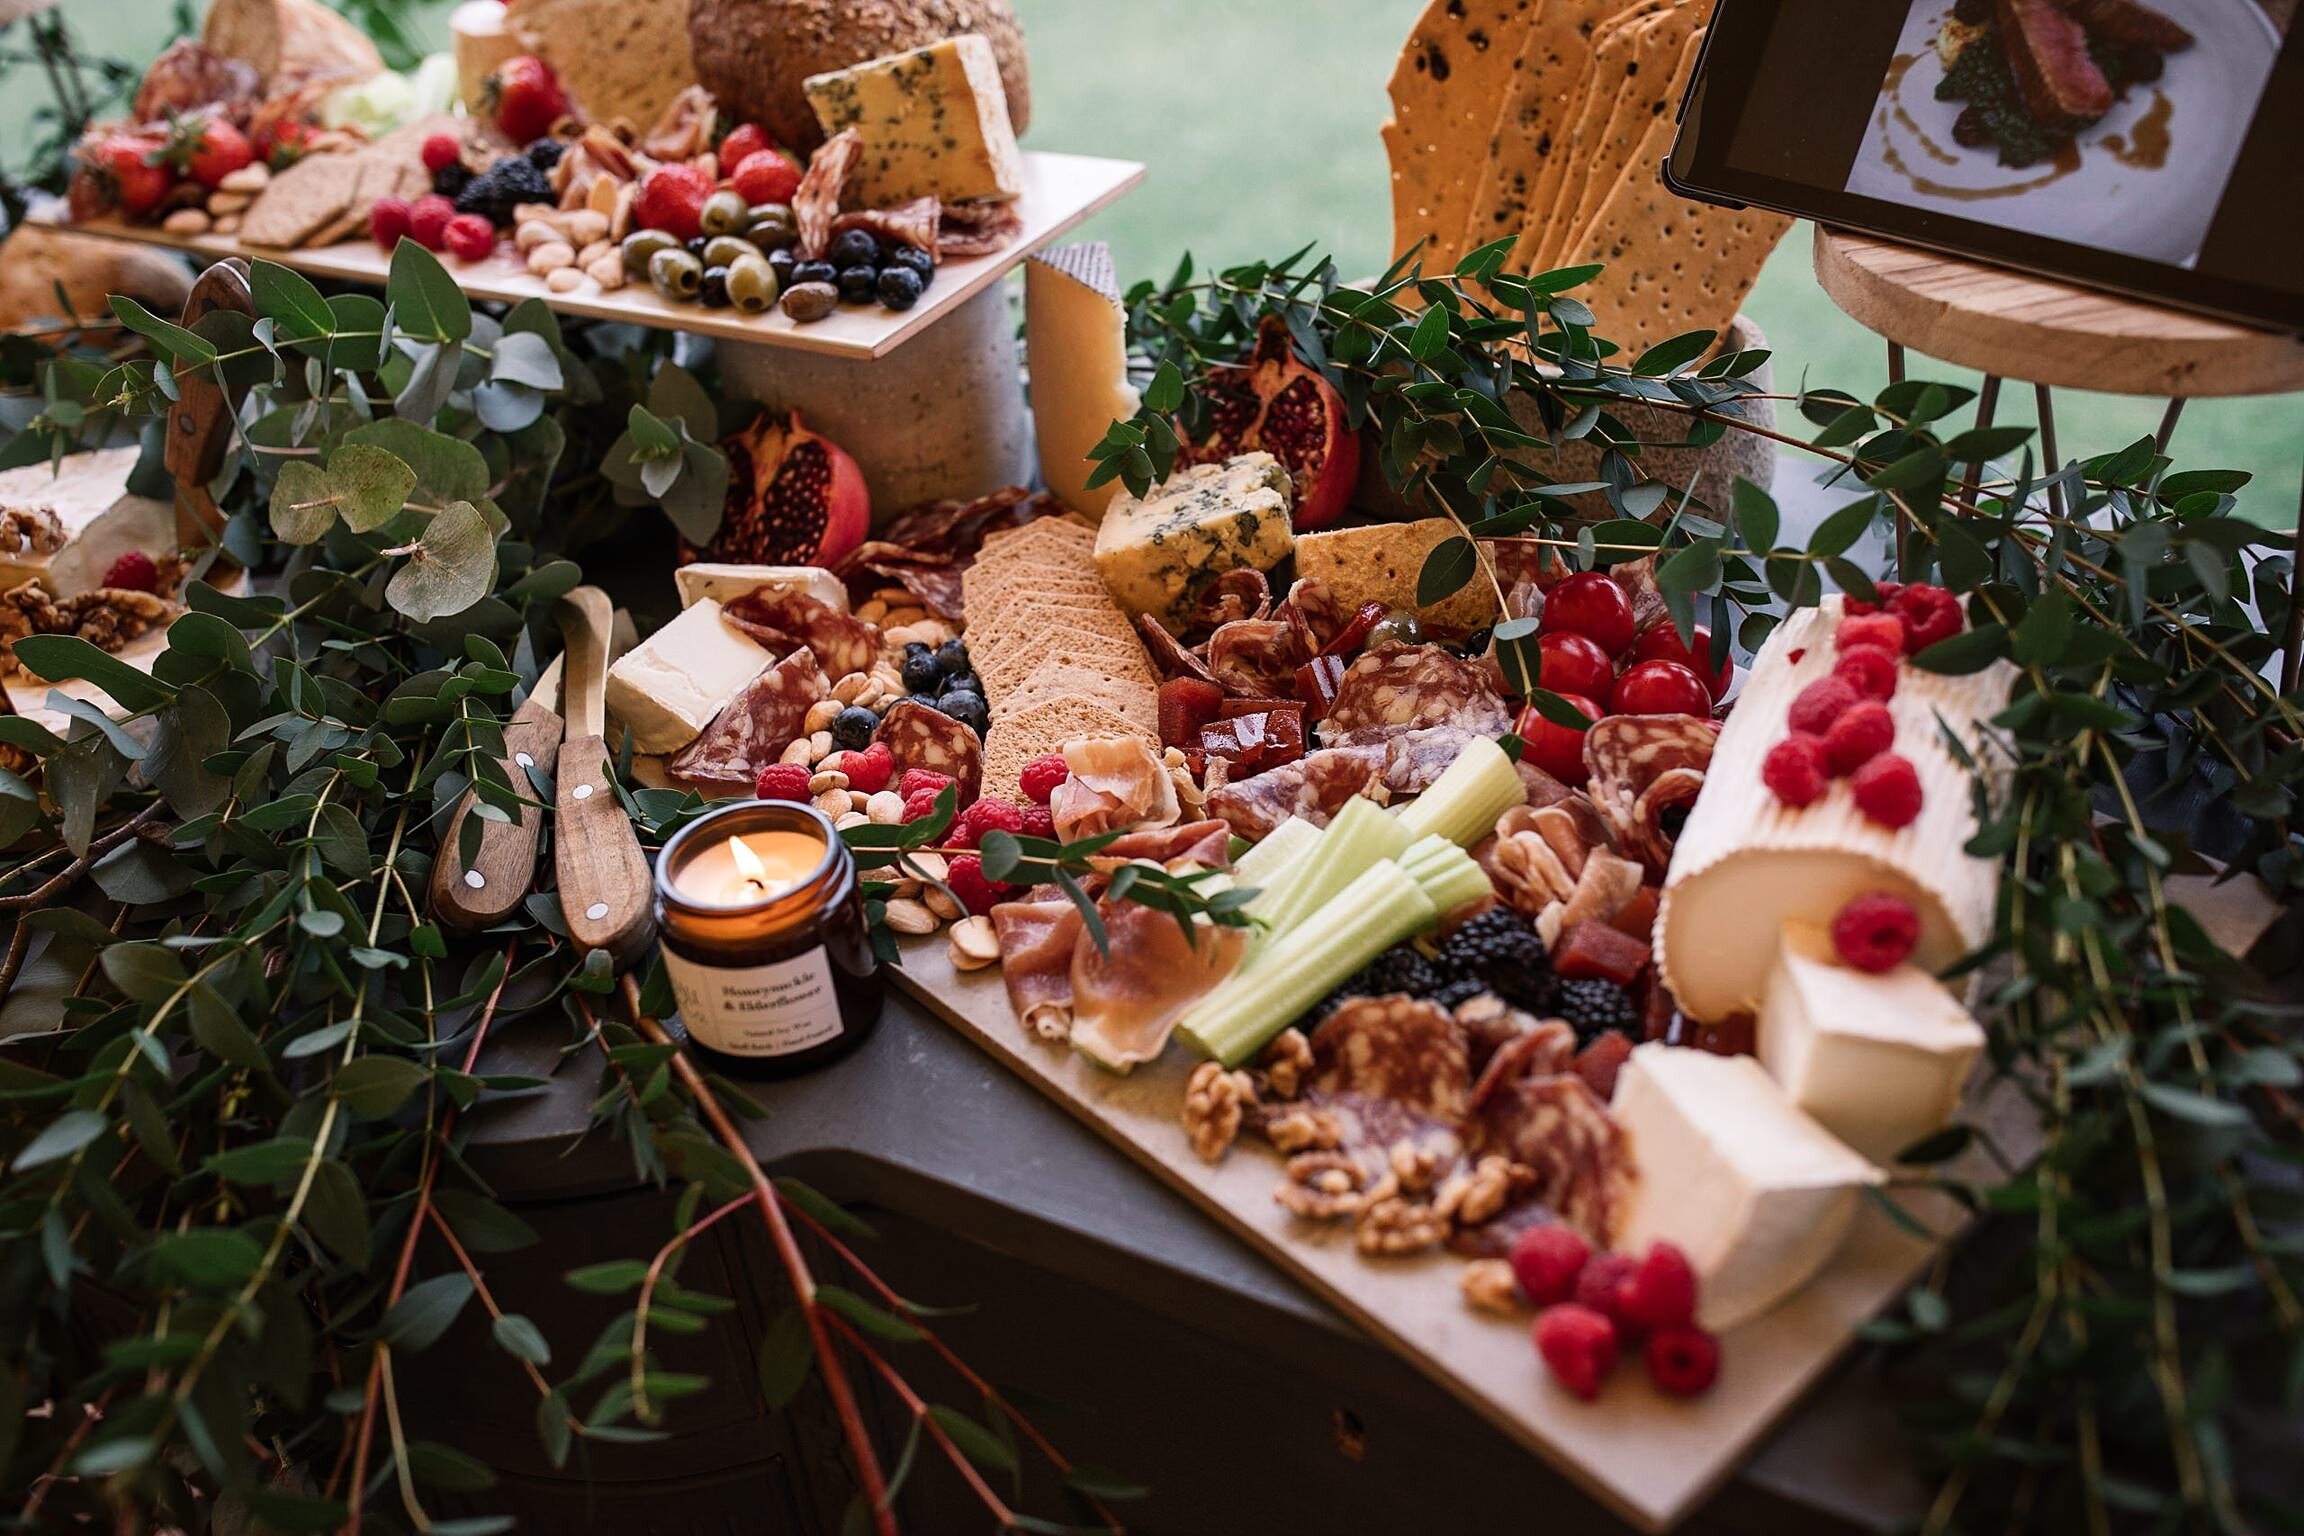 7 easy ways to plan sustainable wedding food_Grazing Table_Becky Harley Photography